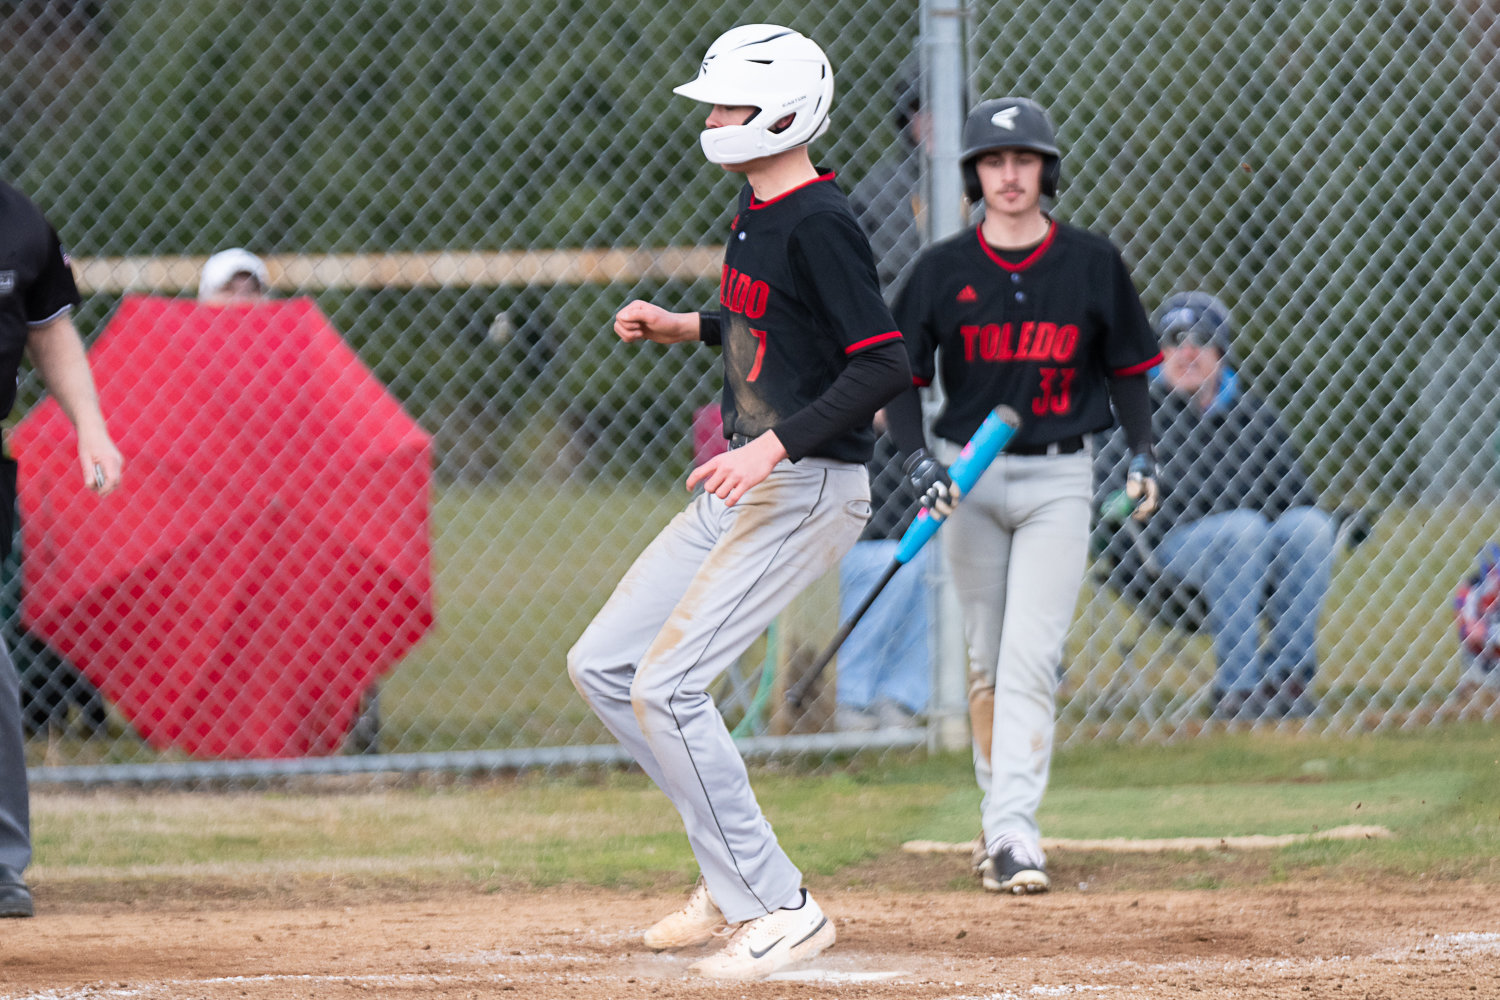 Rogan Stanley scores on a ball to the backstop during Toledo's 4-1 win over Napavine in Game 1 of a doubleheader on March 20.